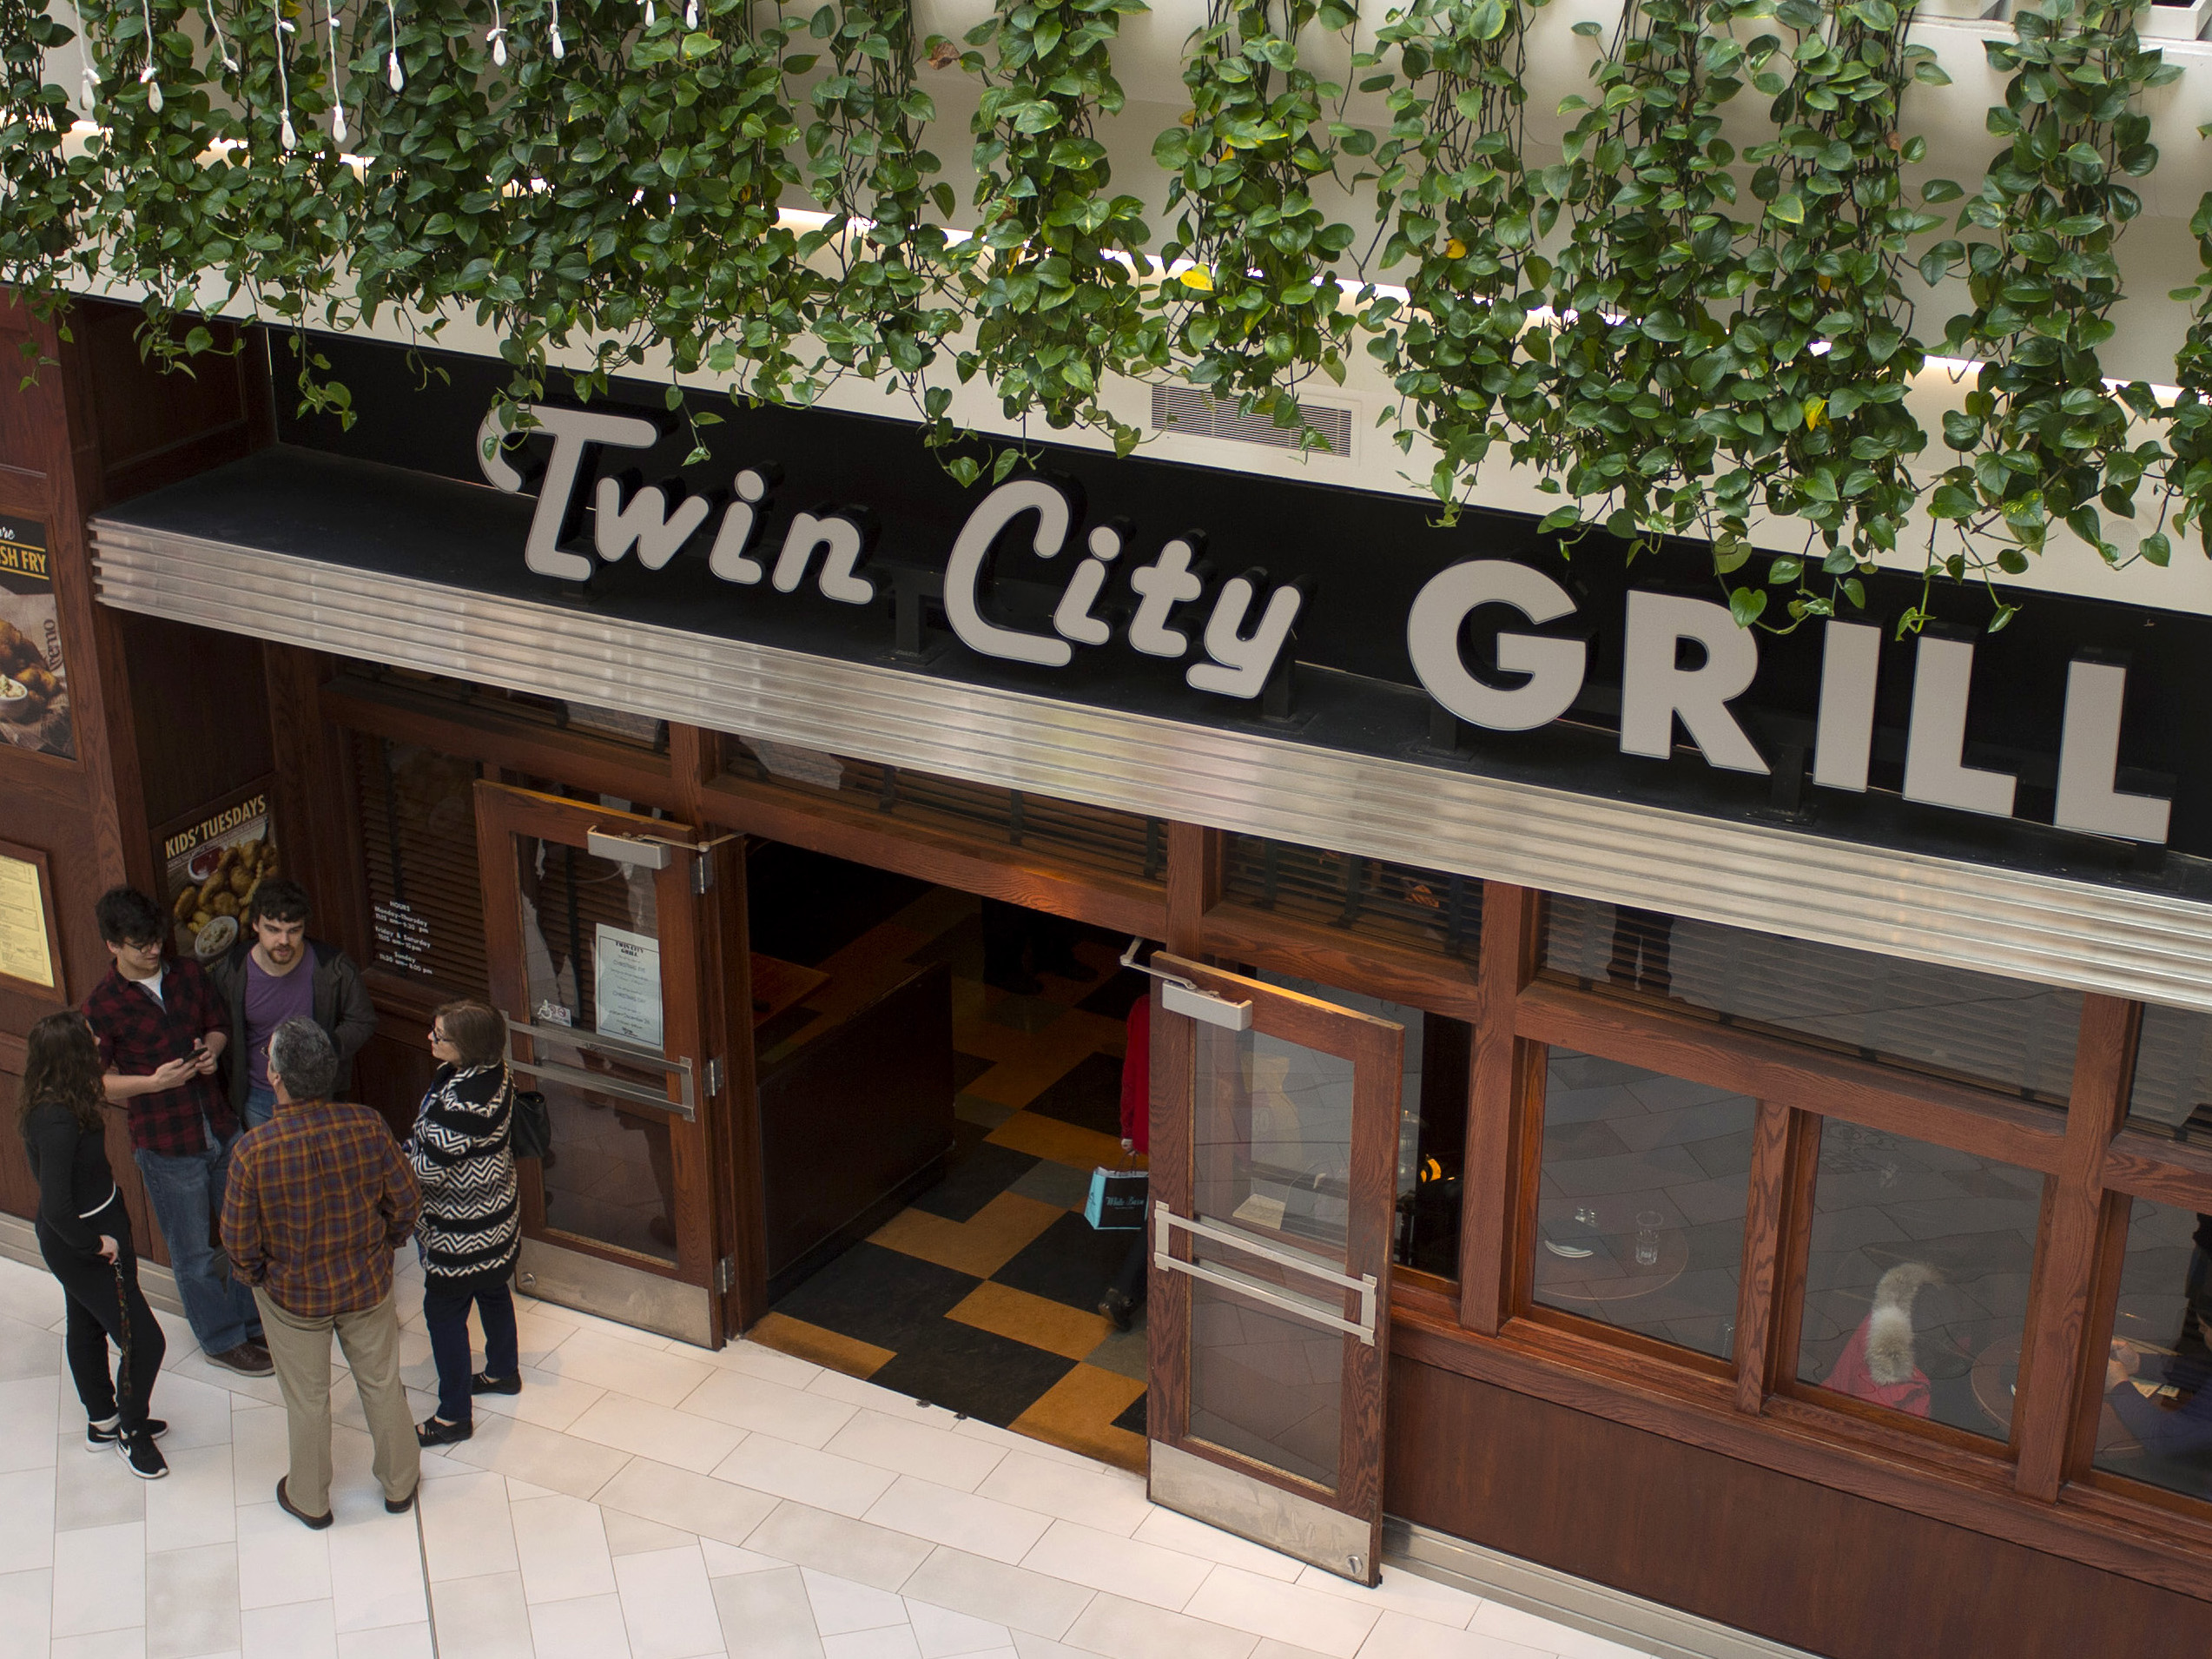 Twin City Grill sign